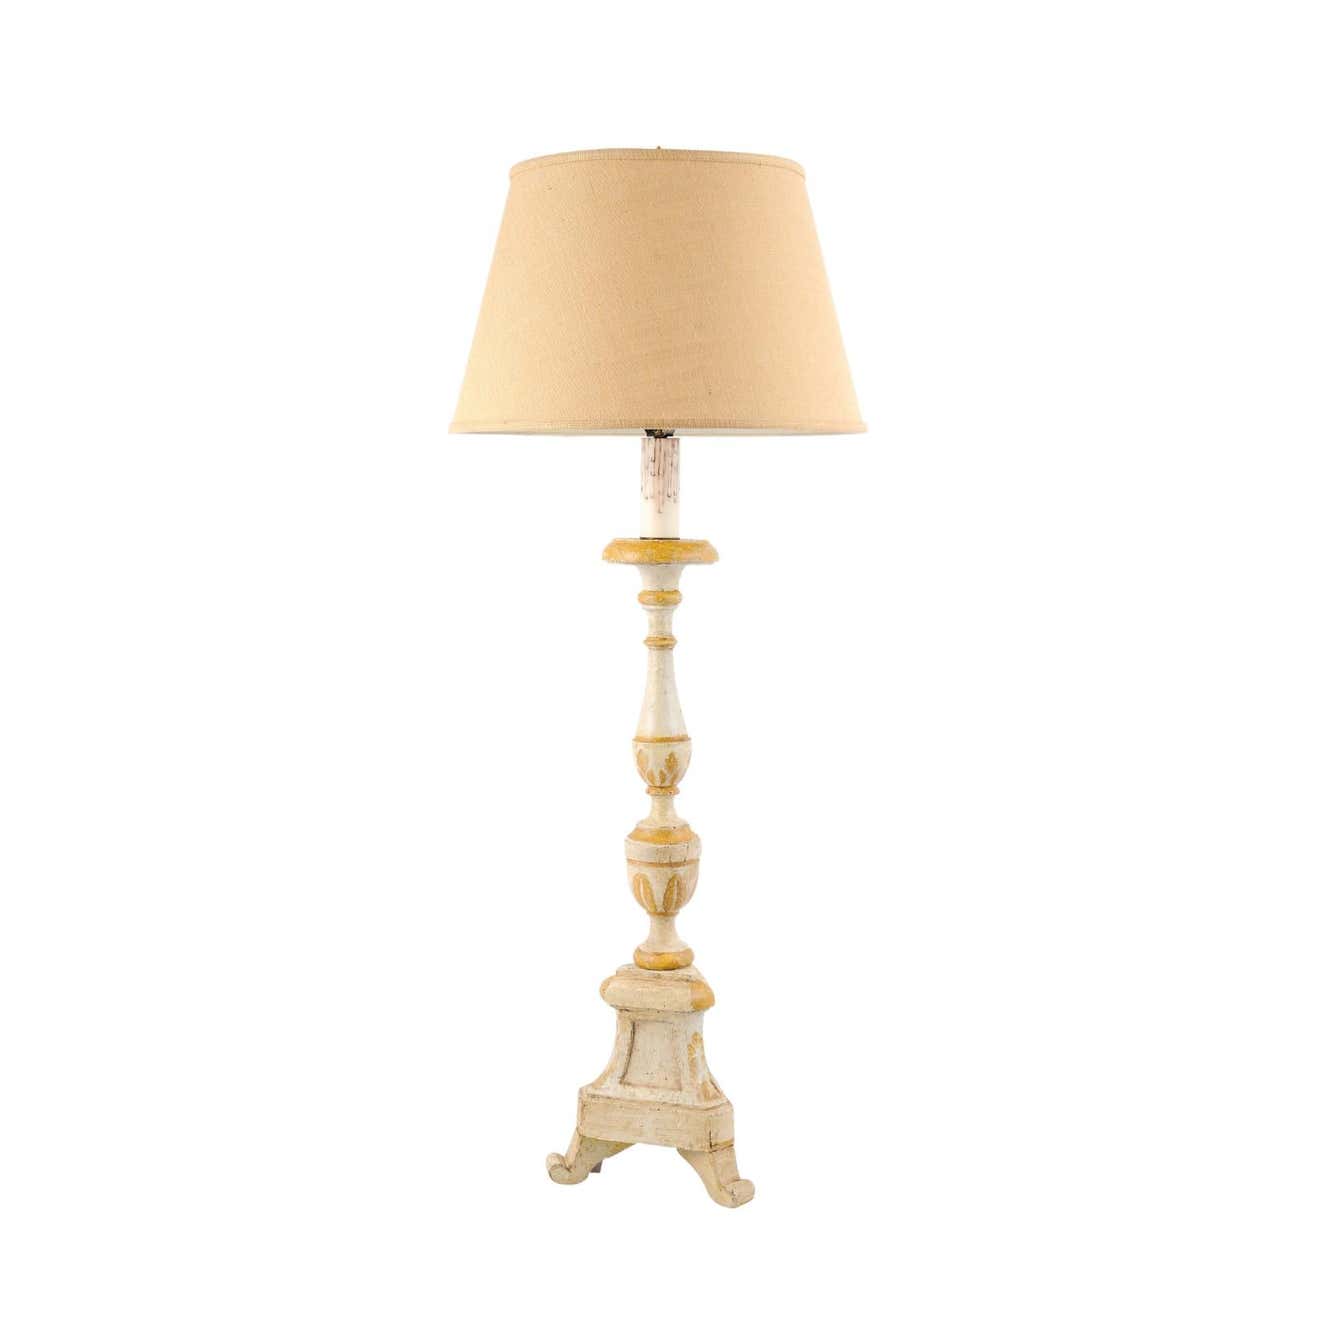 French 19th Century Painted and Carved Candlestick Mounted as a Table Lamp